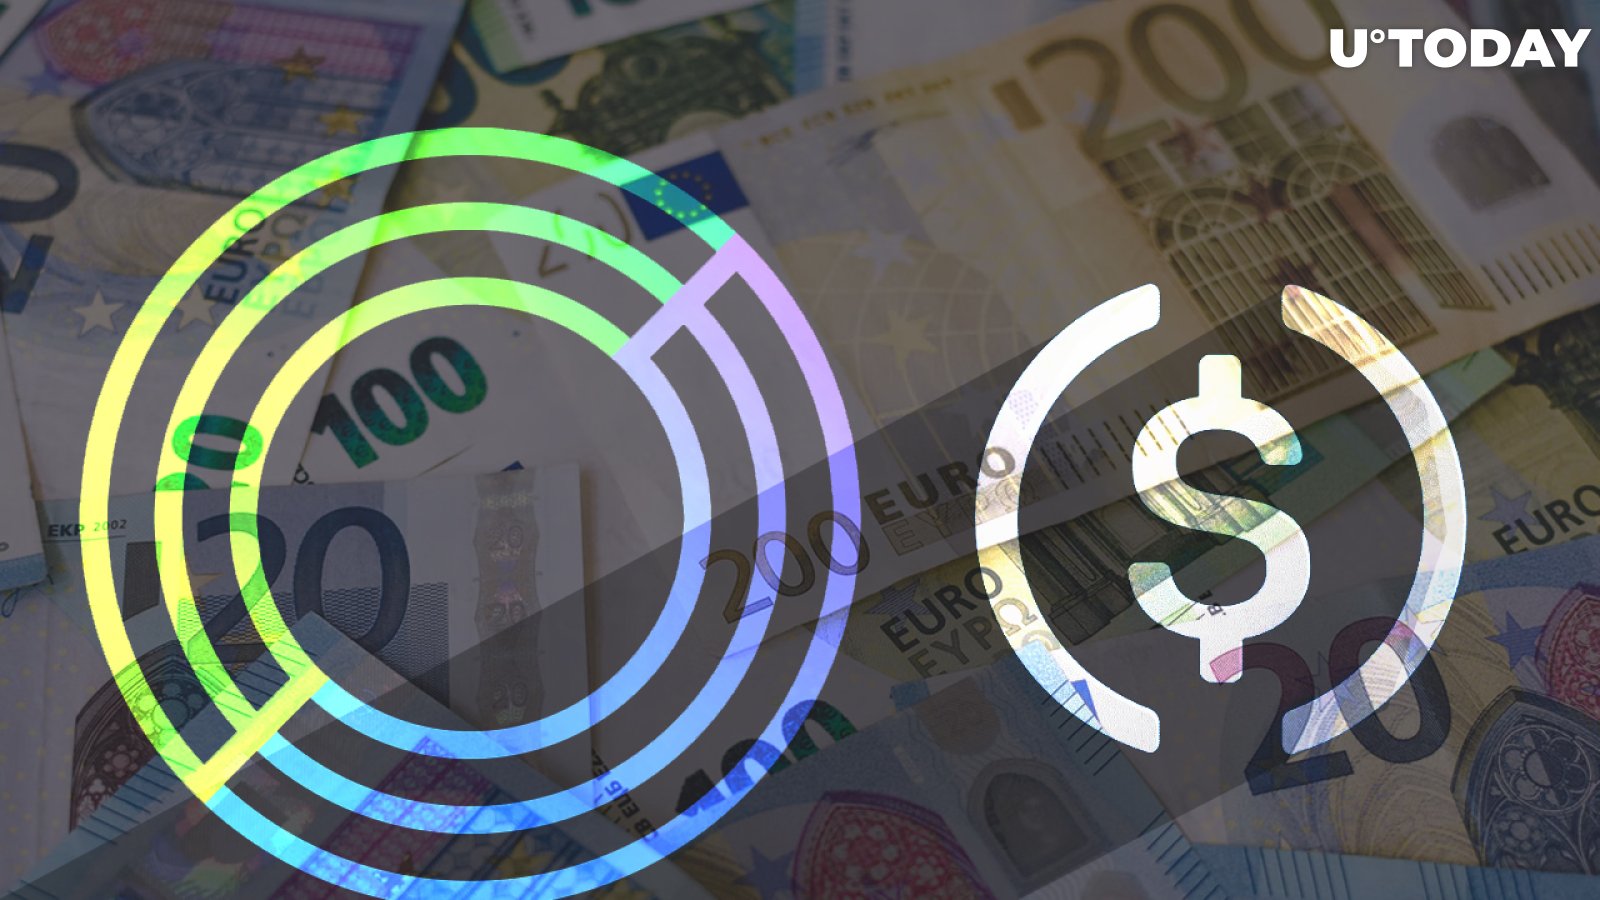 Circle to Issue Euro-Backed Stablecoin